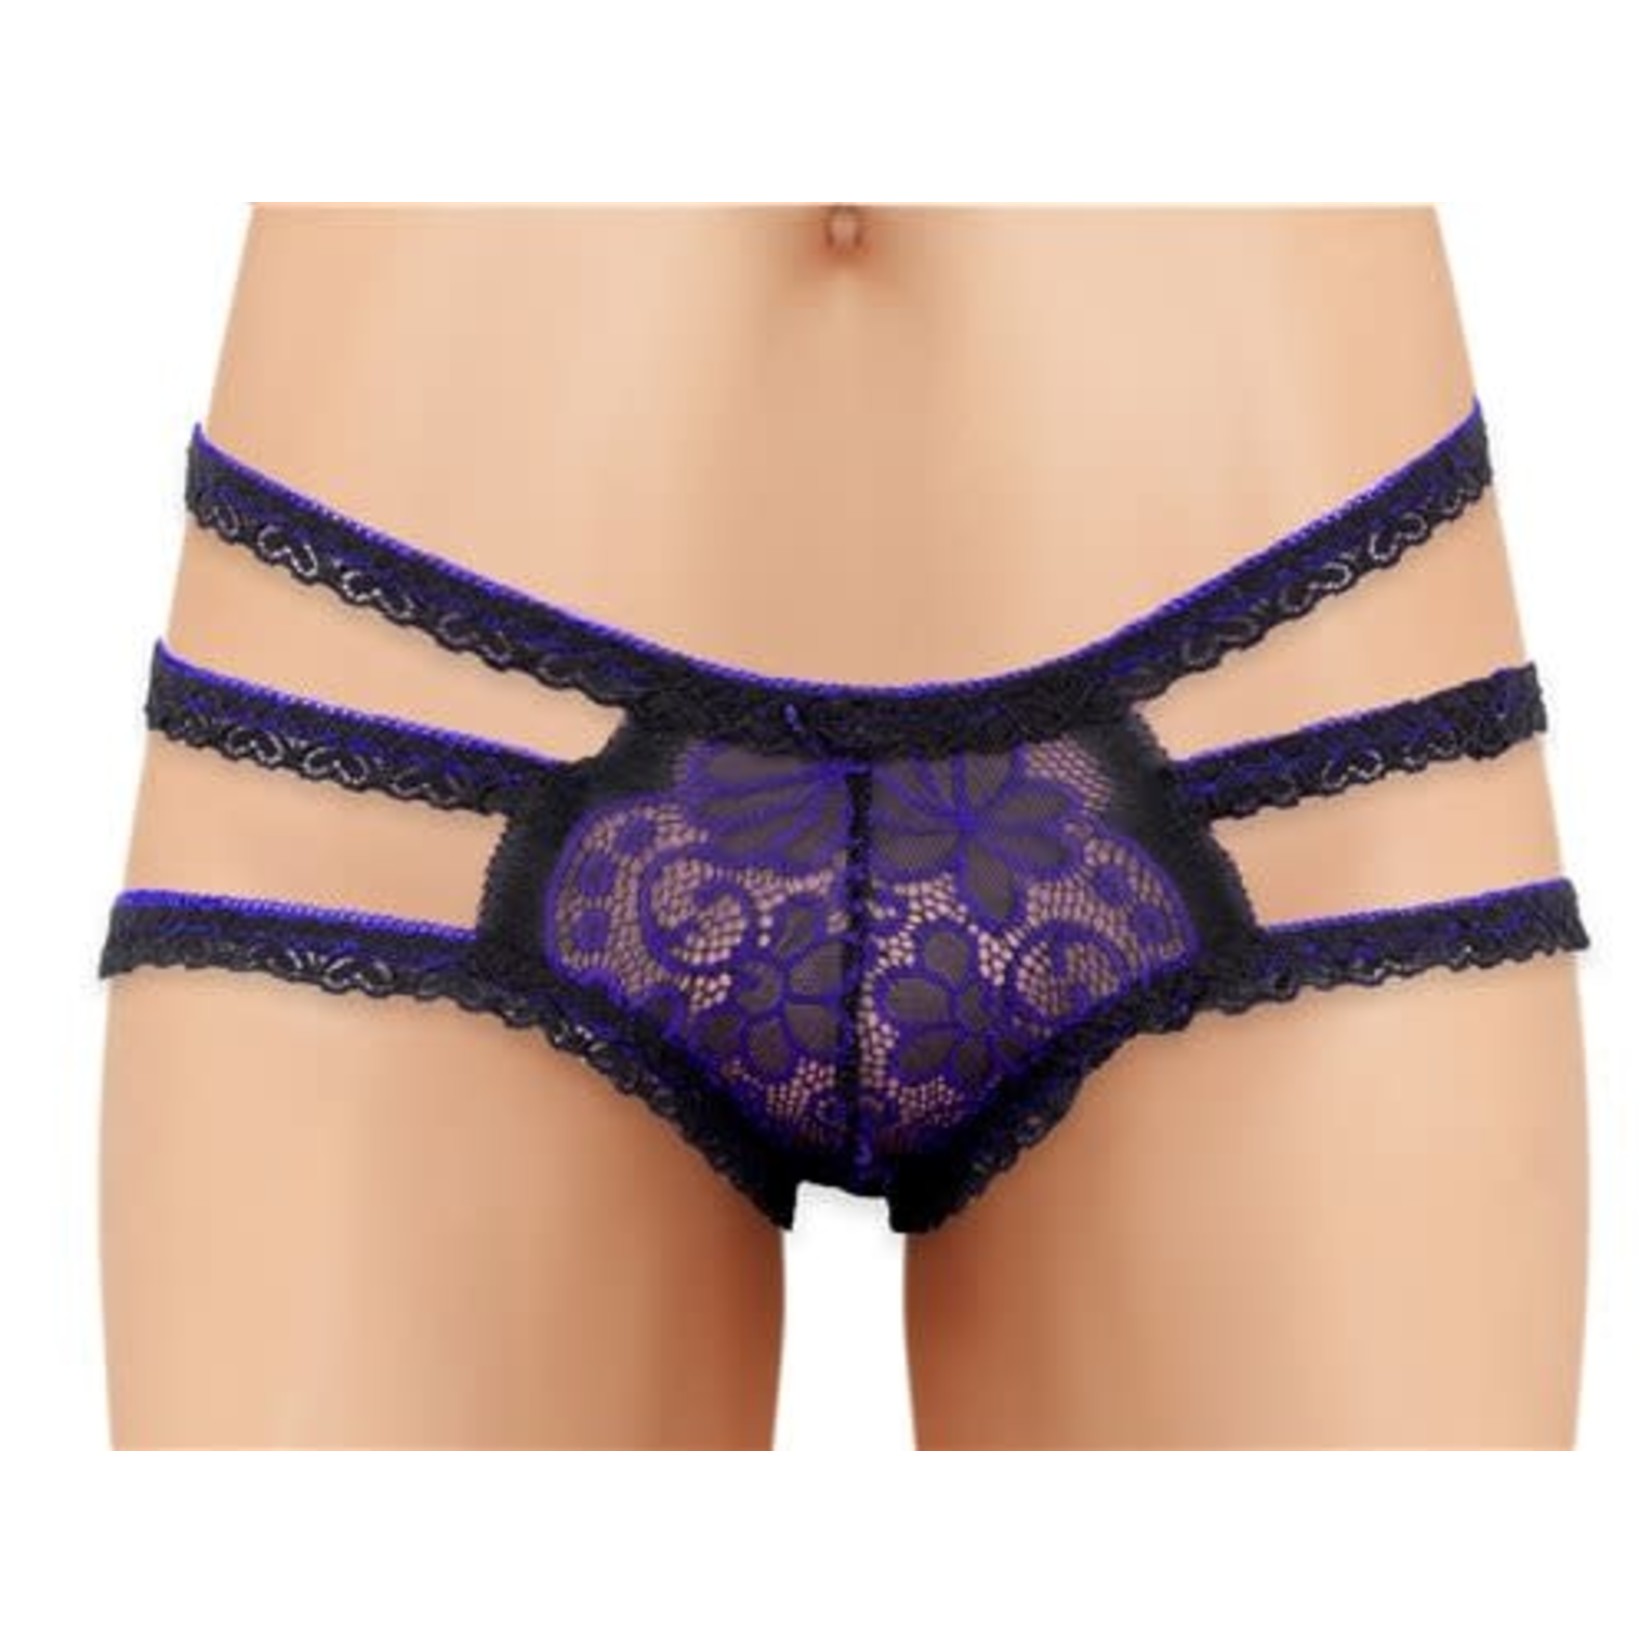 CHERRY WEAR - LACE PANTY WITH FLORAL DESIGN - PURPLE - ONE SIZE